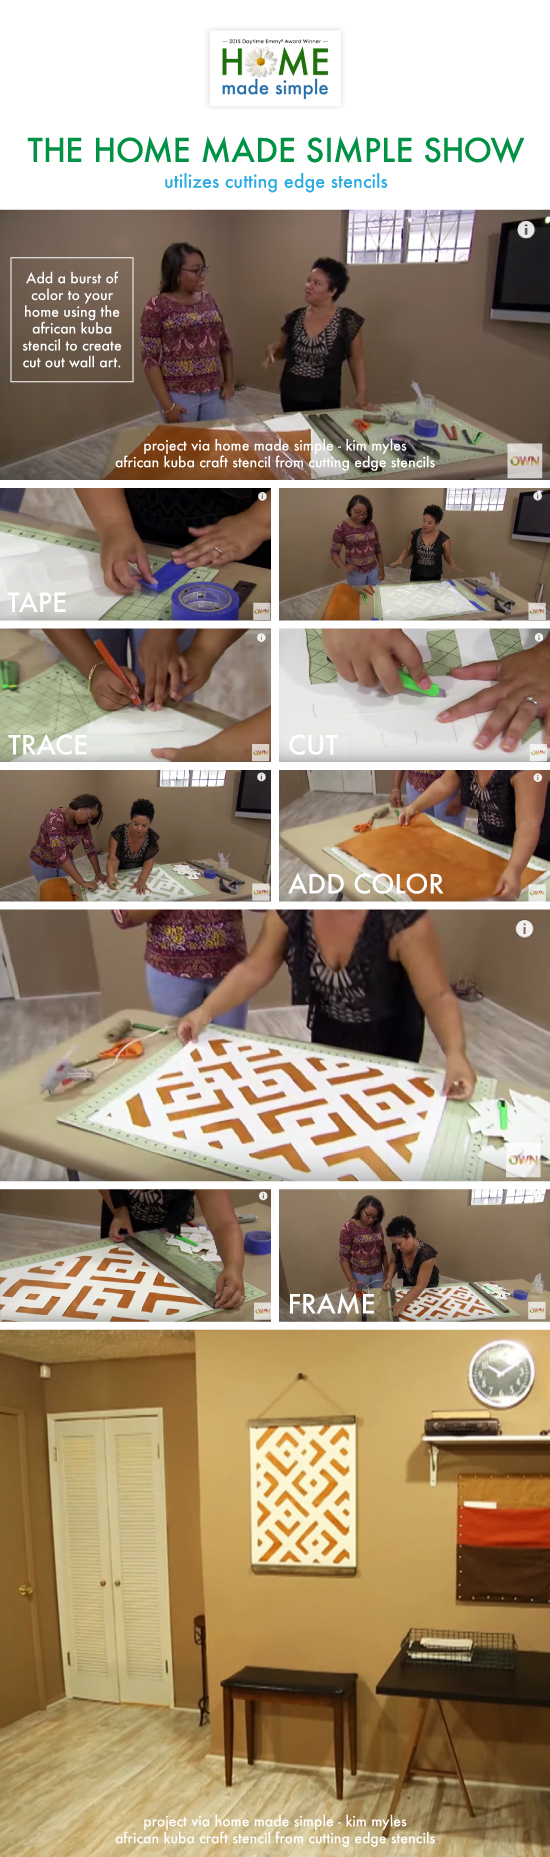 The Oprah Network's Home Made Simple Show features Kim Myles using the African Kuba Craft Stencil to create DIY wall art. http://www.cuttingedgestencils.com/kuba-stencil-pattern-stencils.html